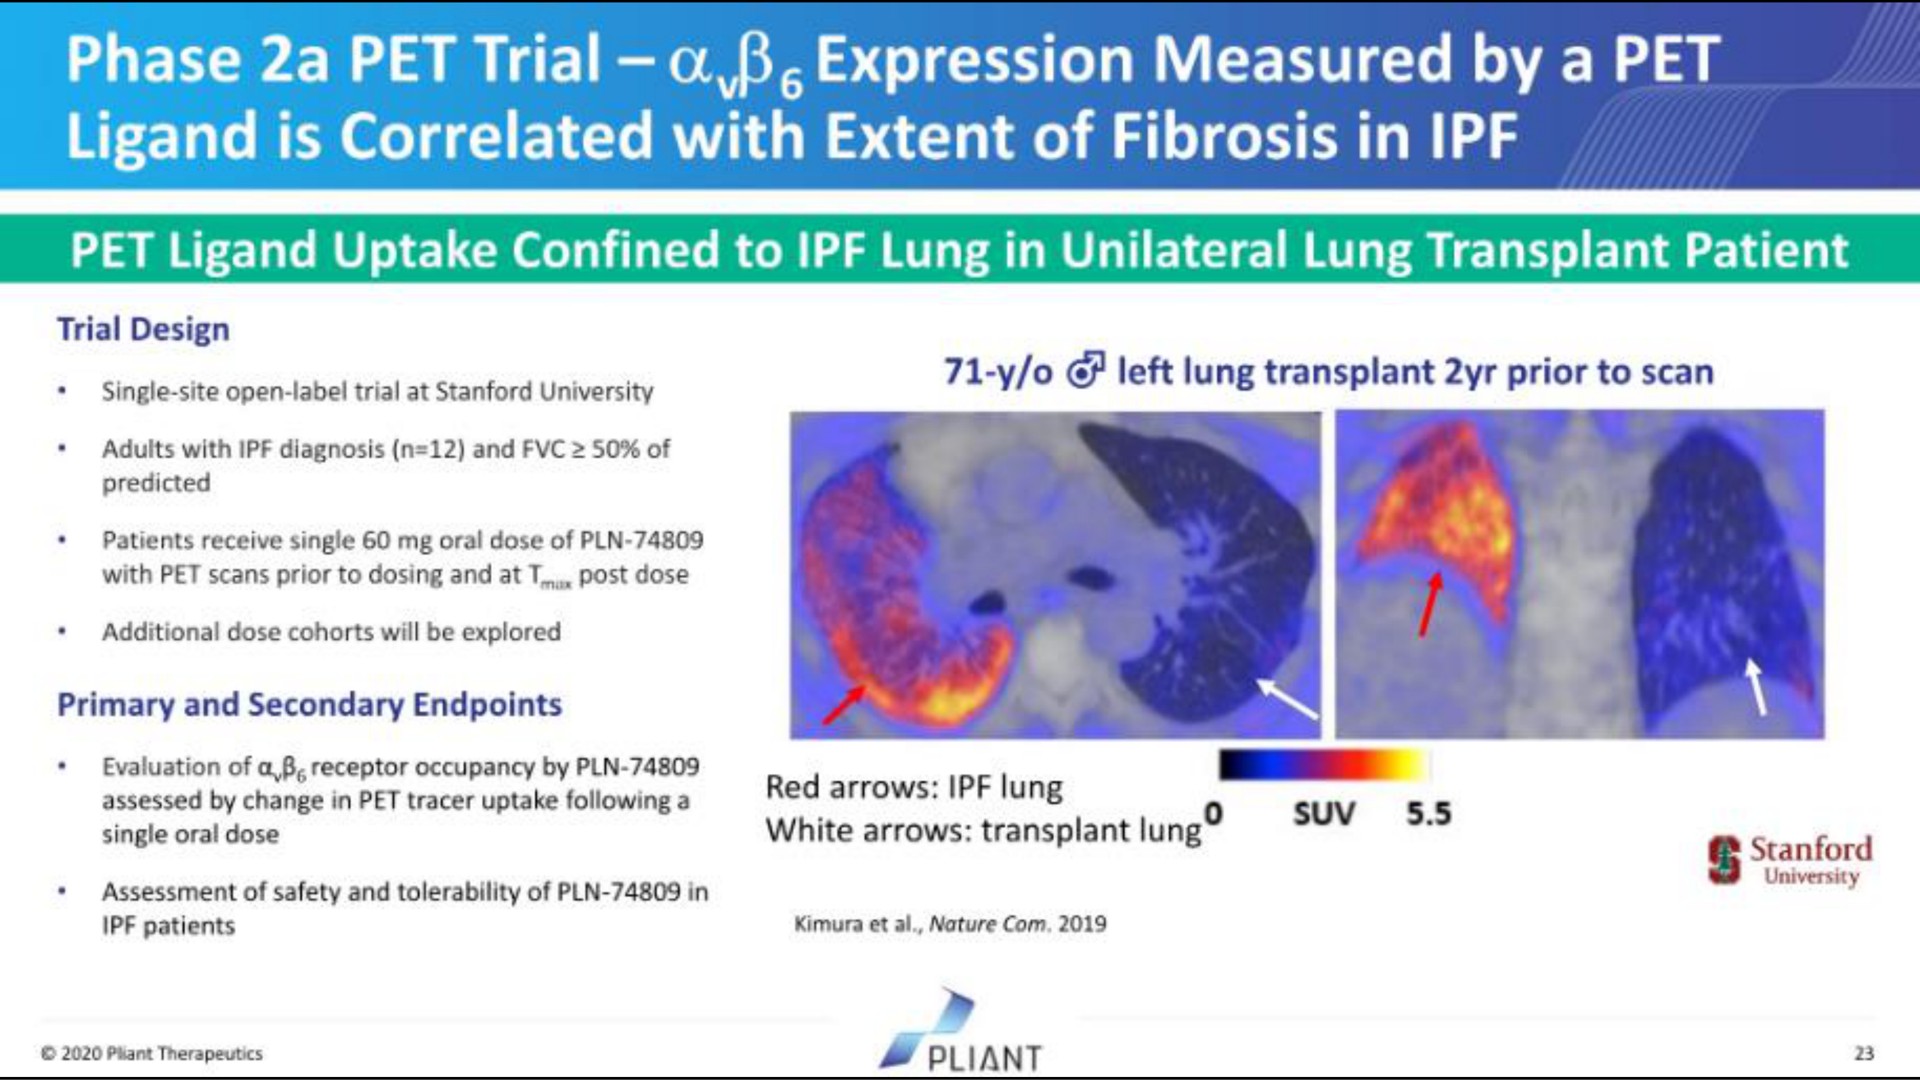 phase a pet trial a expression measured by a pet is correlated with extent of fibrosis in a | Pilant Therapeutics